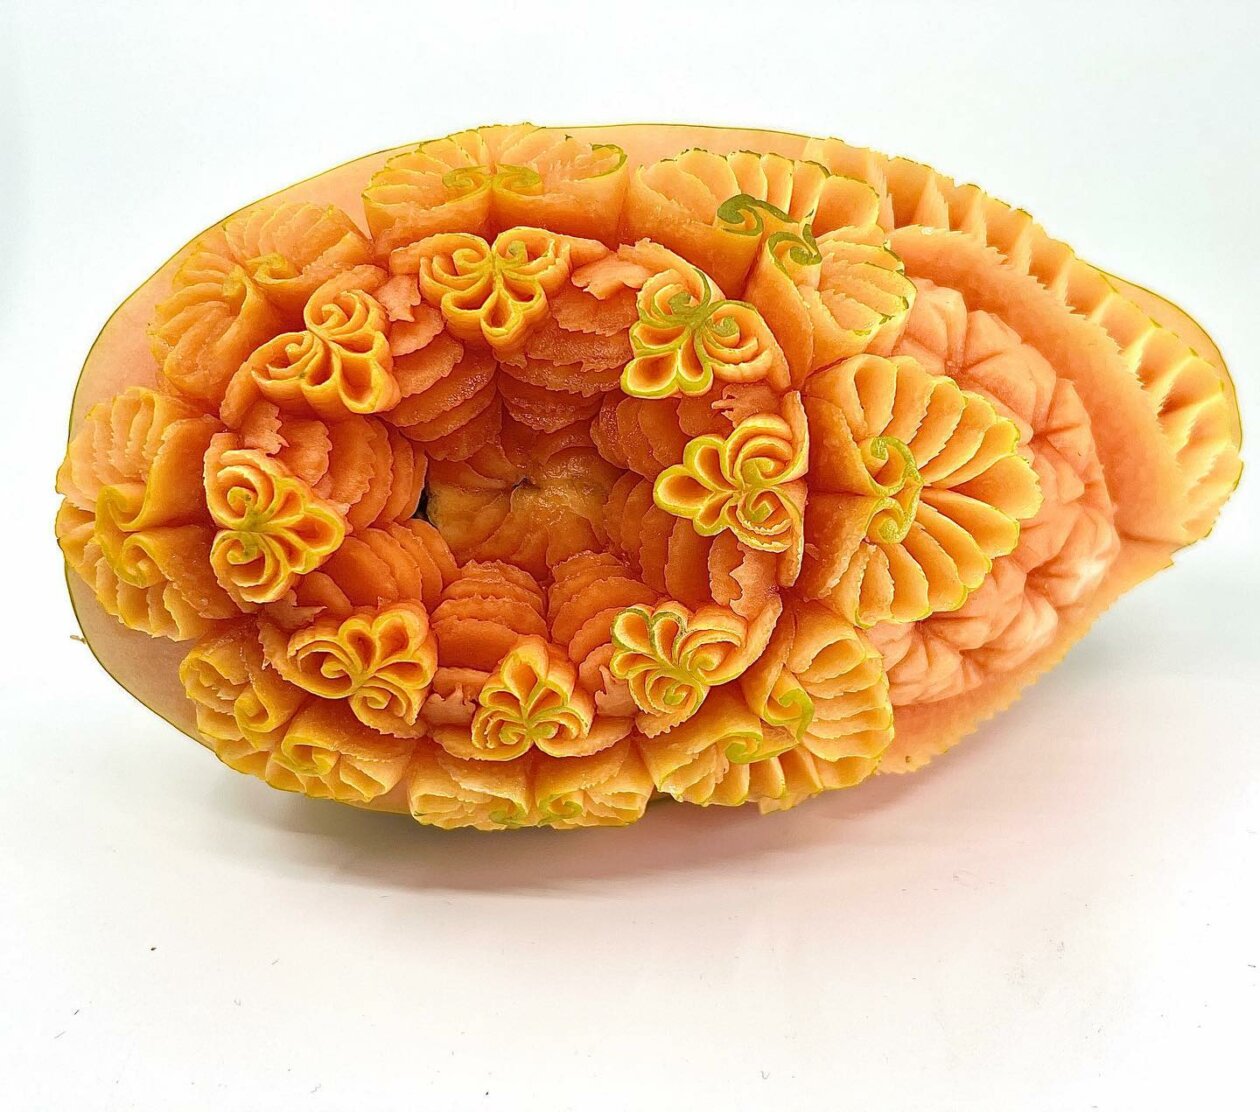 Superb Fruit And Vegetable Carvings By Daniele Barresi 18